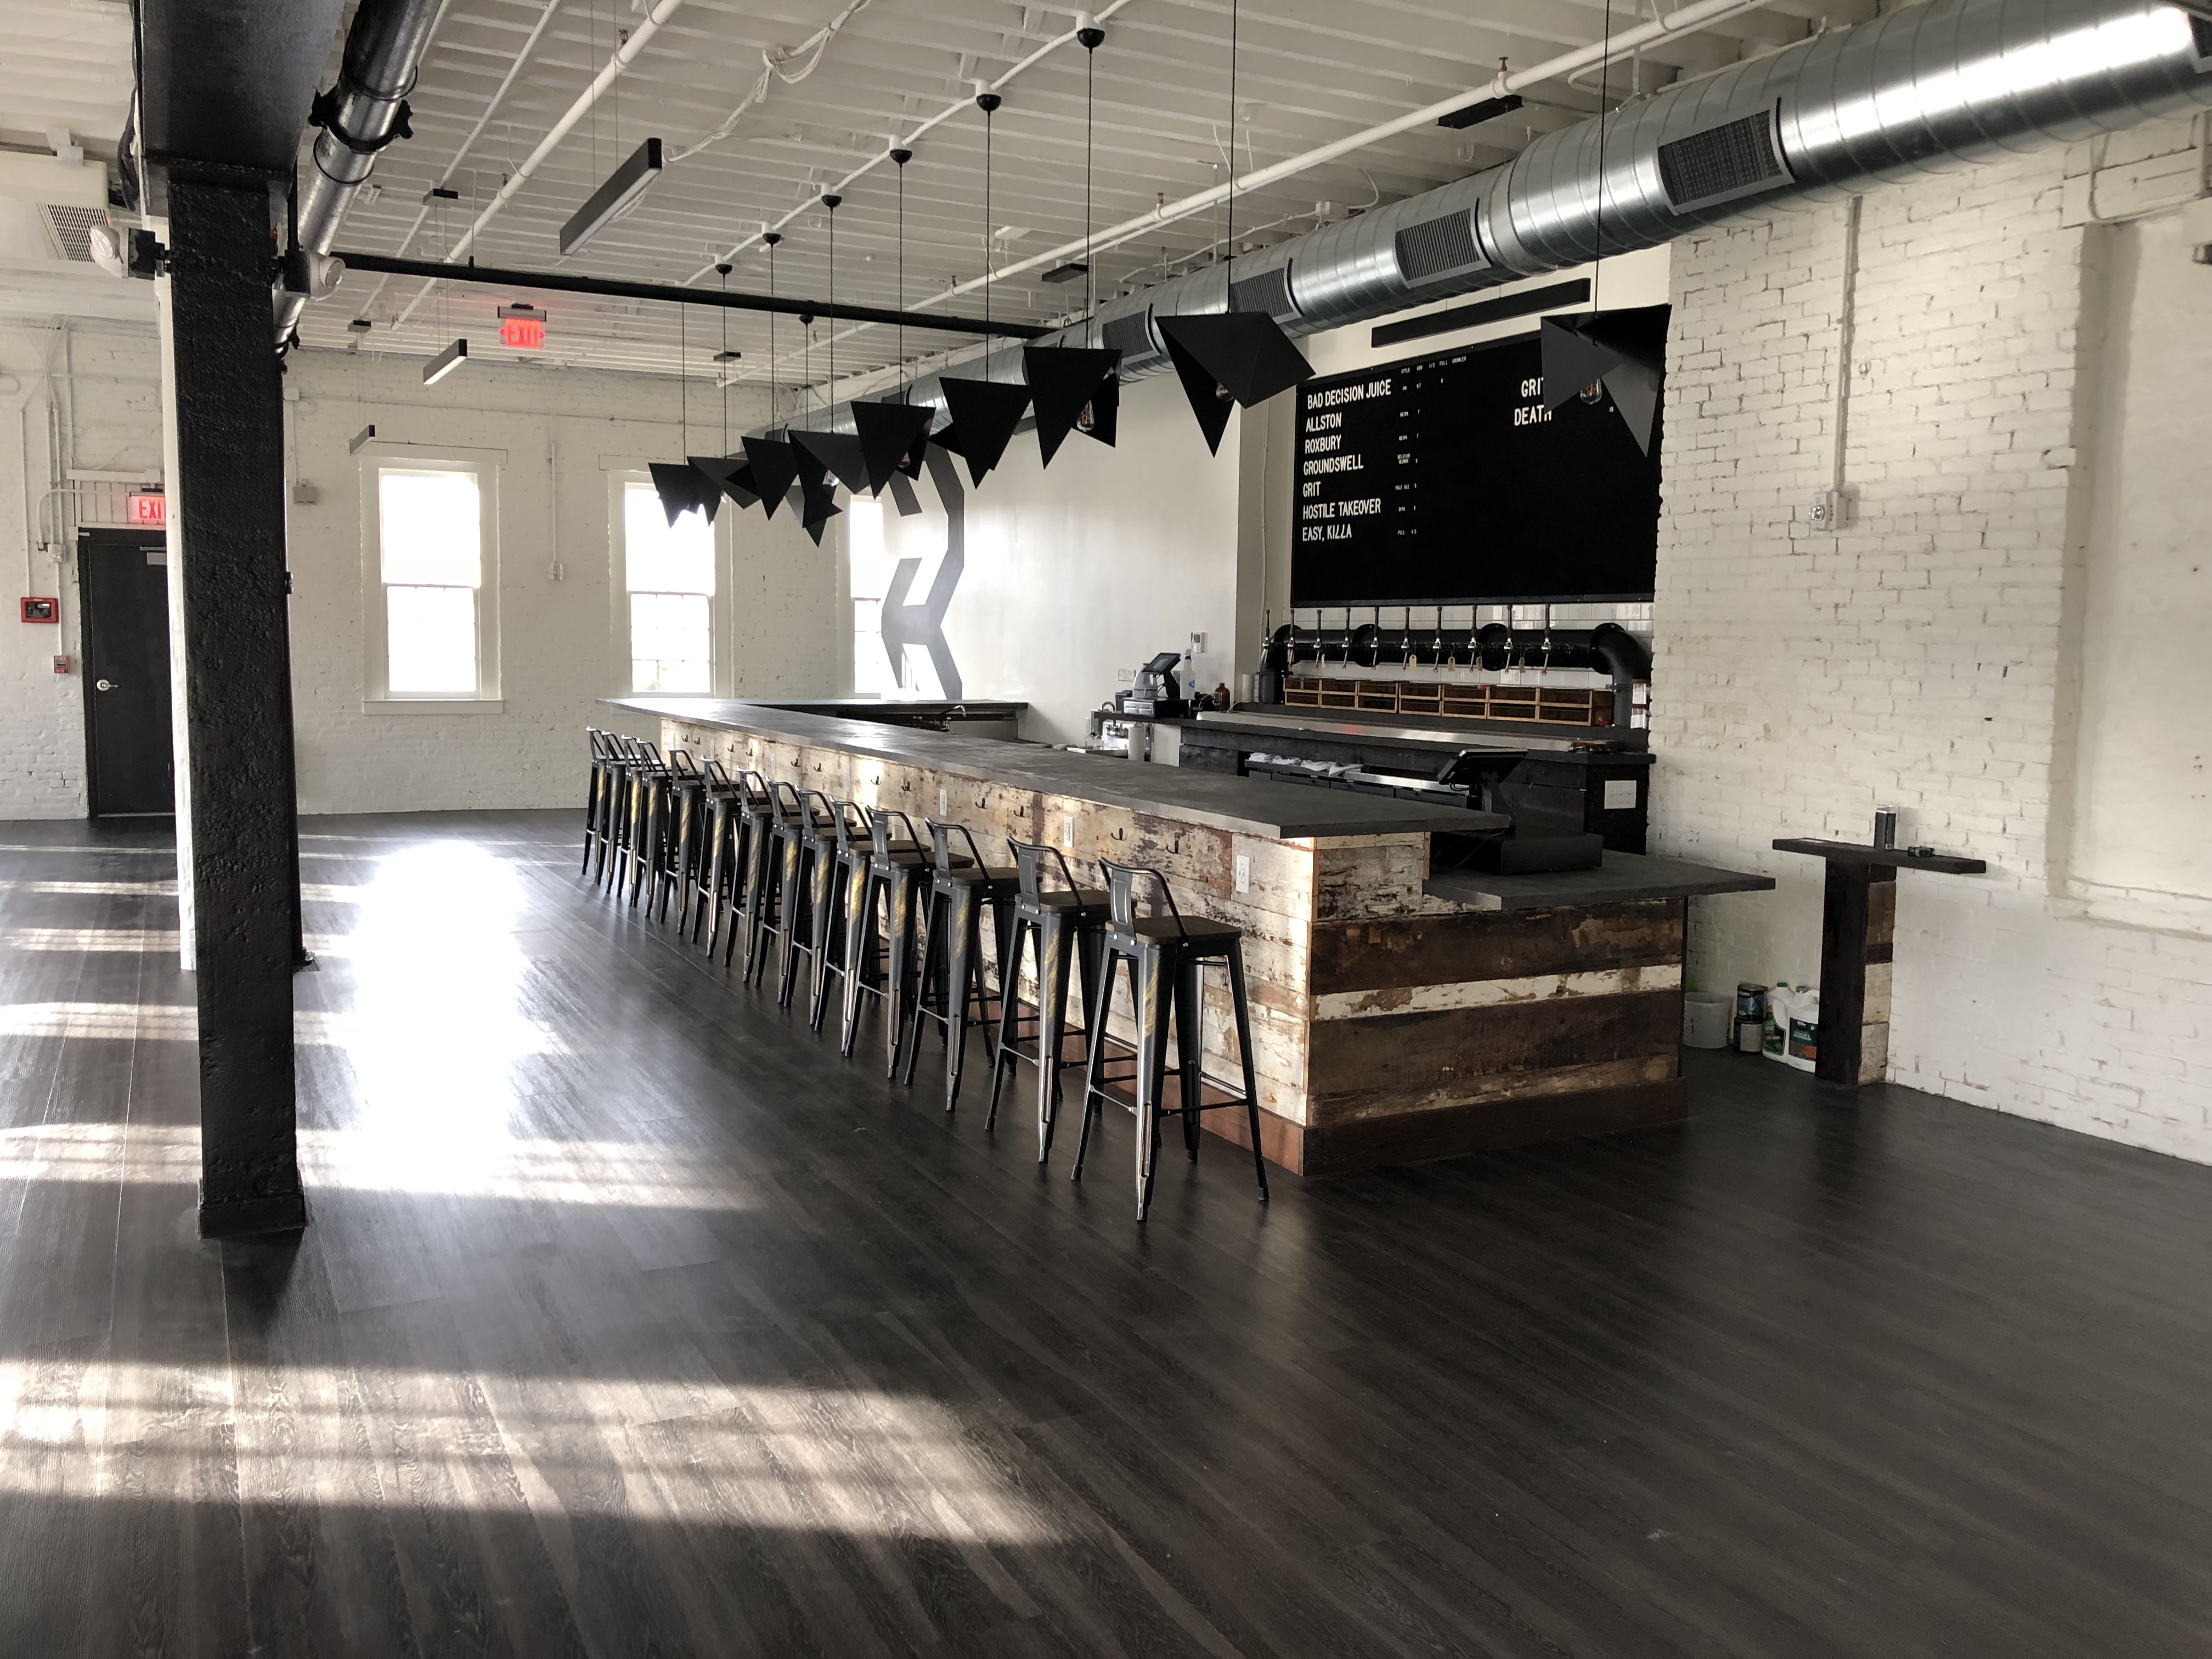 A spacious taproom built out in a former mill space, with white walls, one load-bearing beam, and a sparse, modern bar.